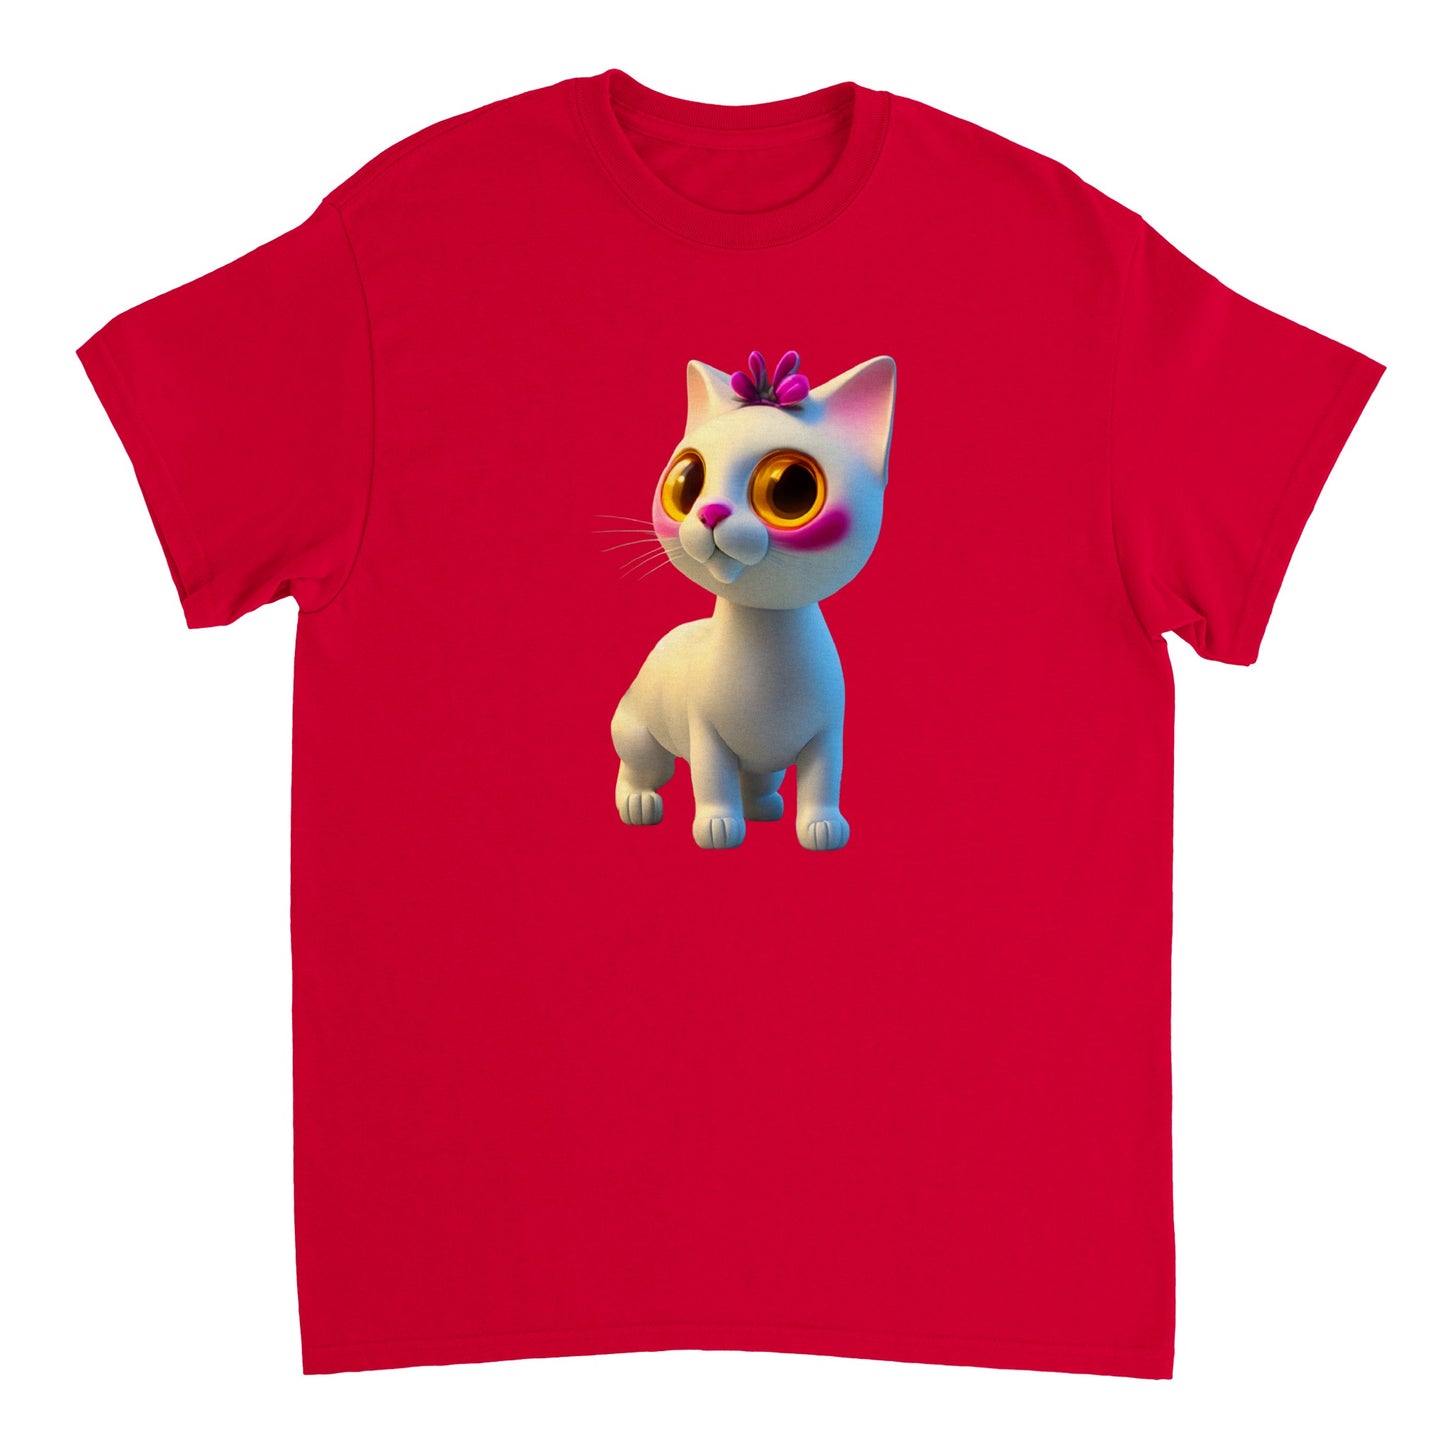 Adorable, Cool, Cute Cats and Kittens Toy - Heavyweight Unisex Crewneck T-shirt 47